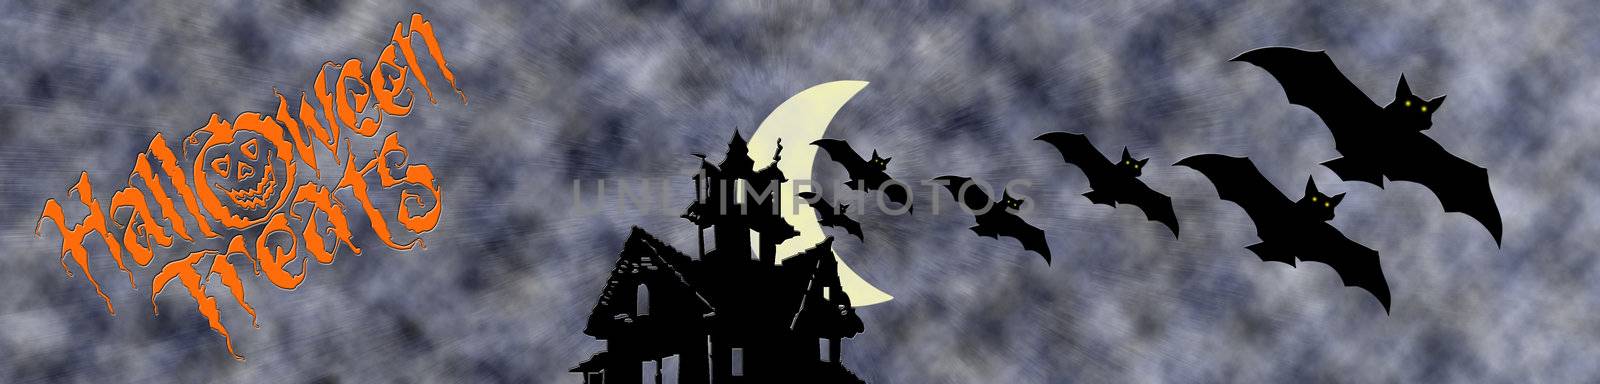 Illustration of Halloween for web banners or graphics
